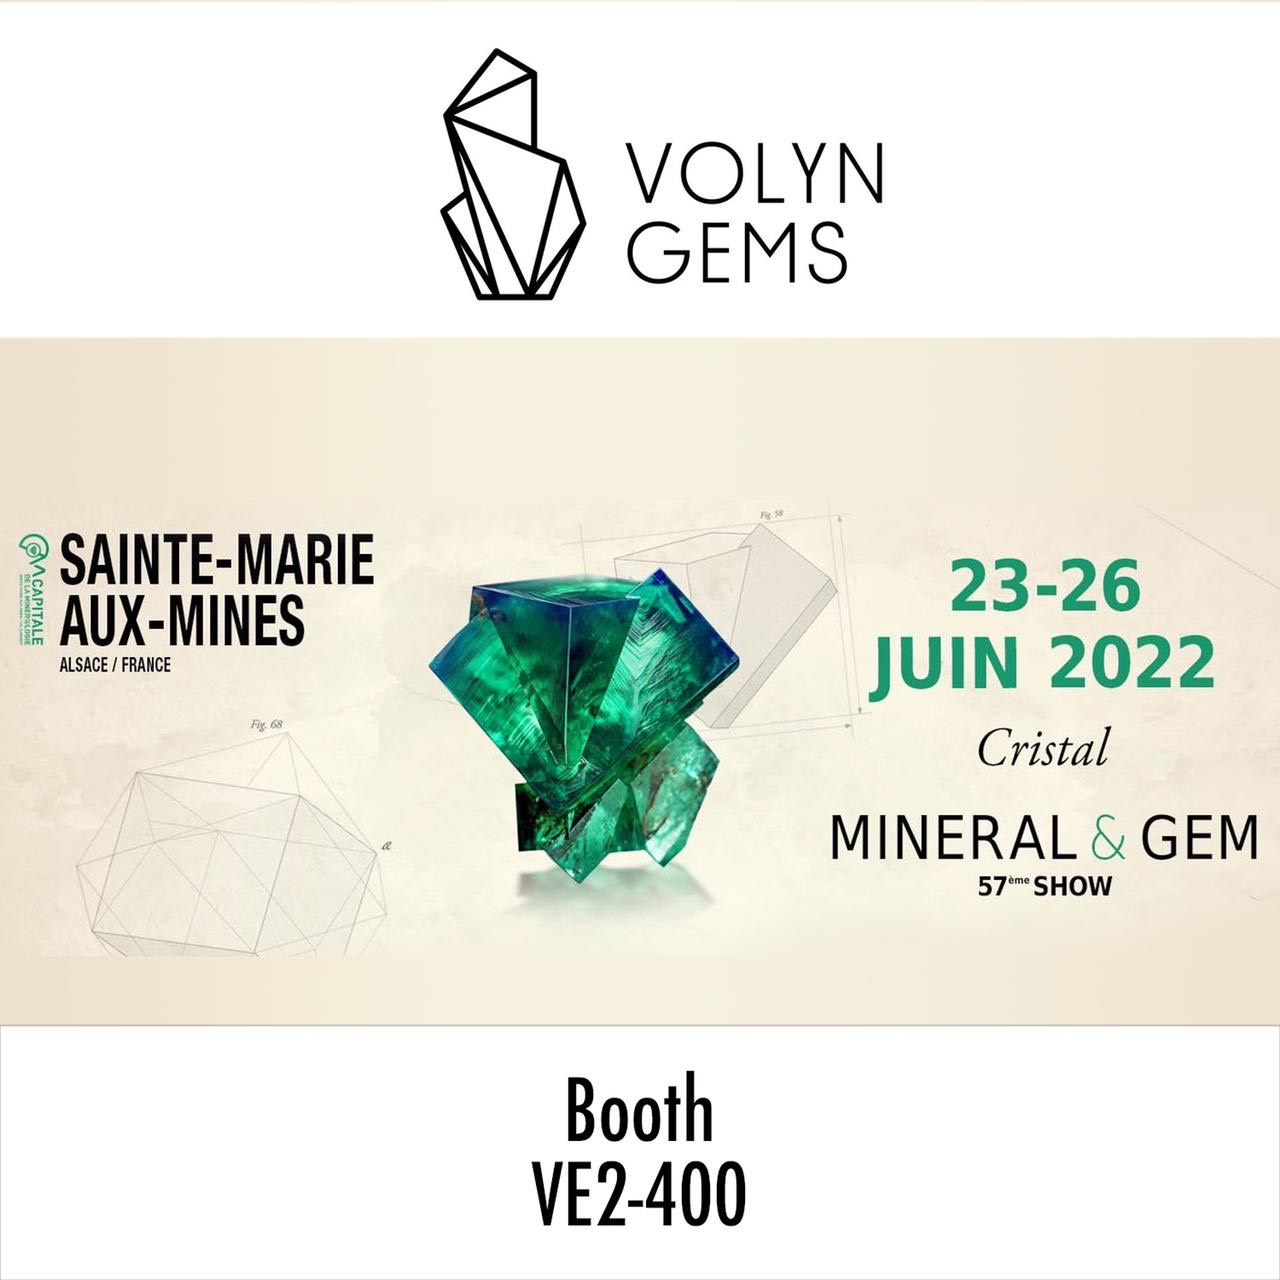 The company Volyn Gems will take part in the international mineralogical exhibition Sainte-Marie-aux-Mines, France.